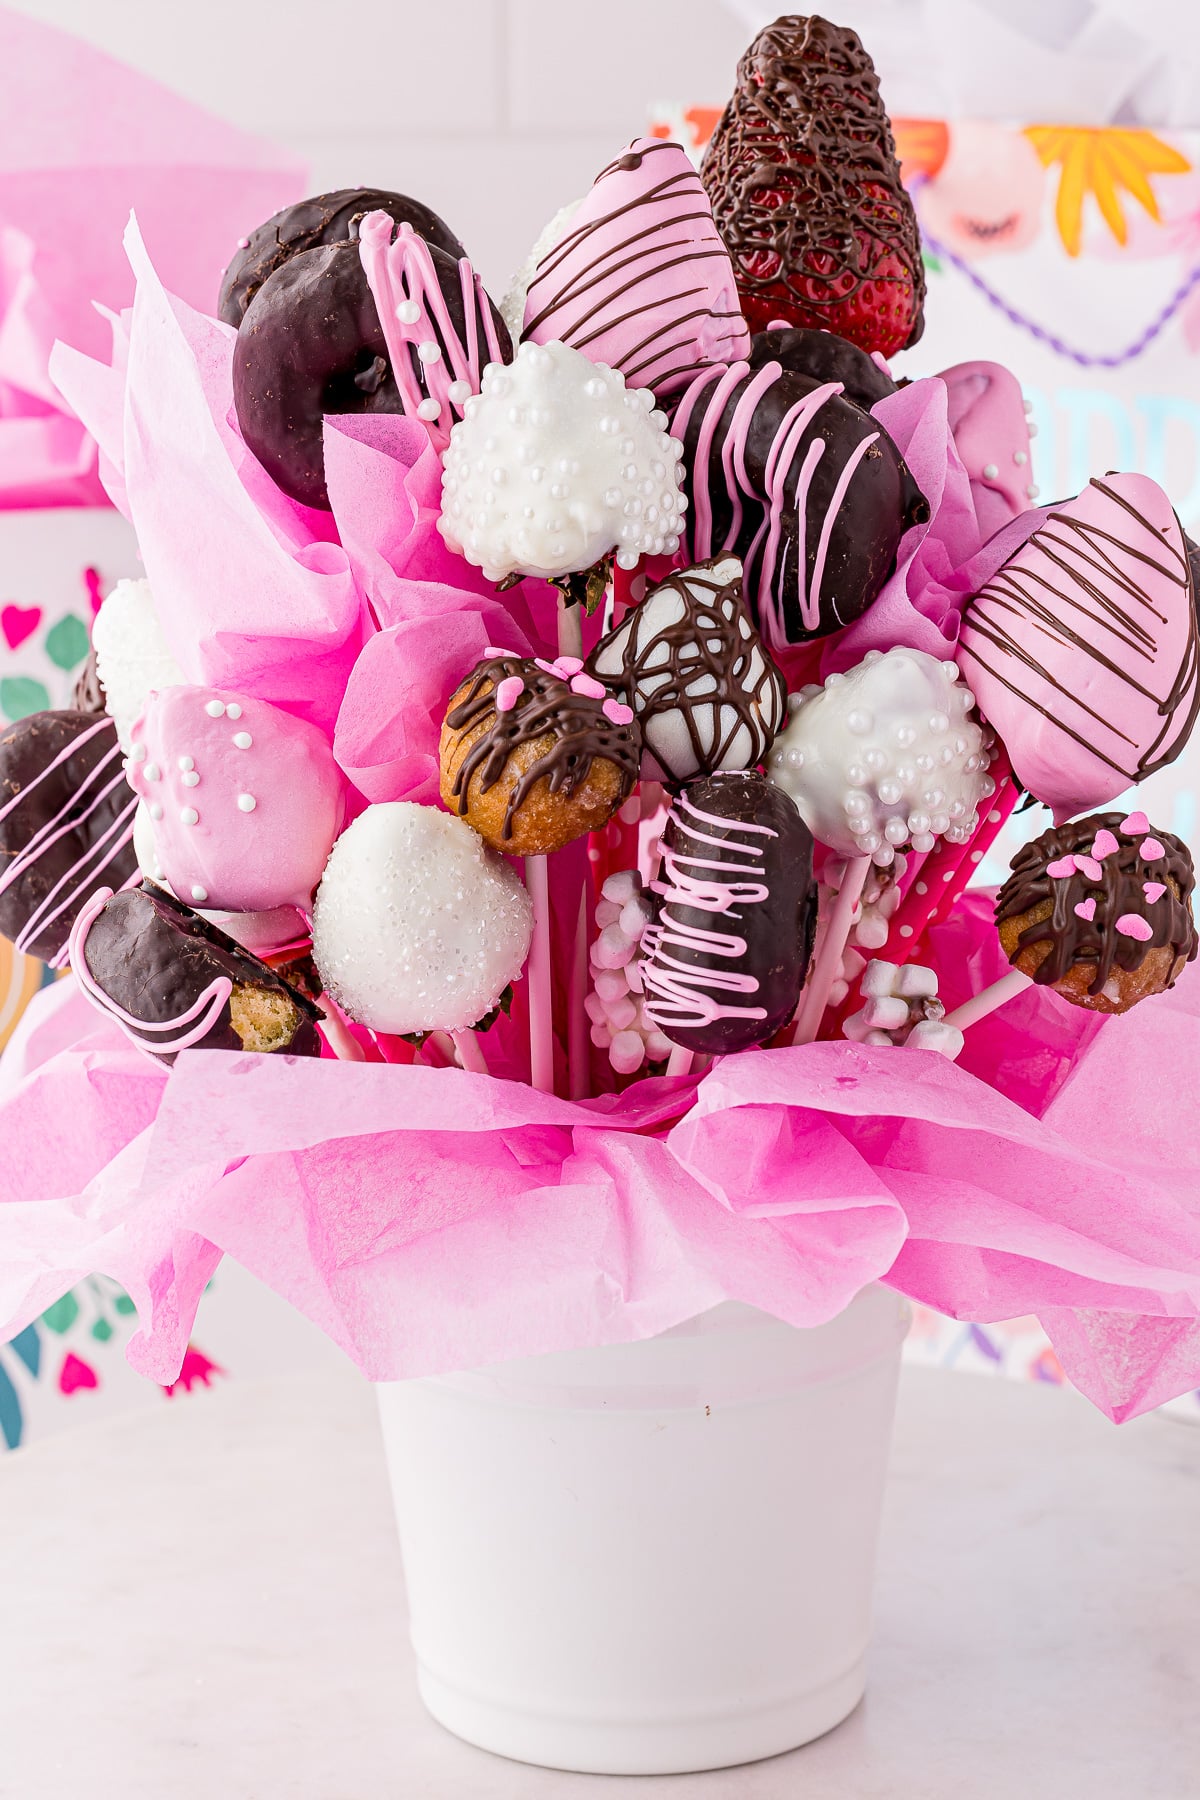 A bright bouquet of chocolate covered treats in pink tissue in a white bucket